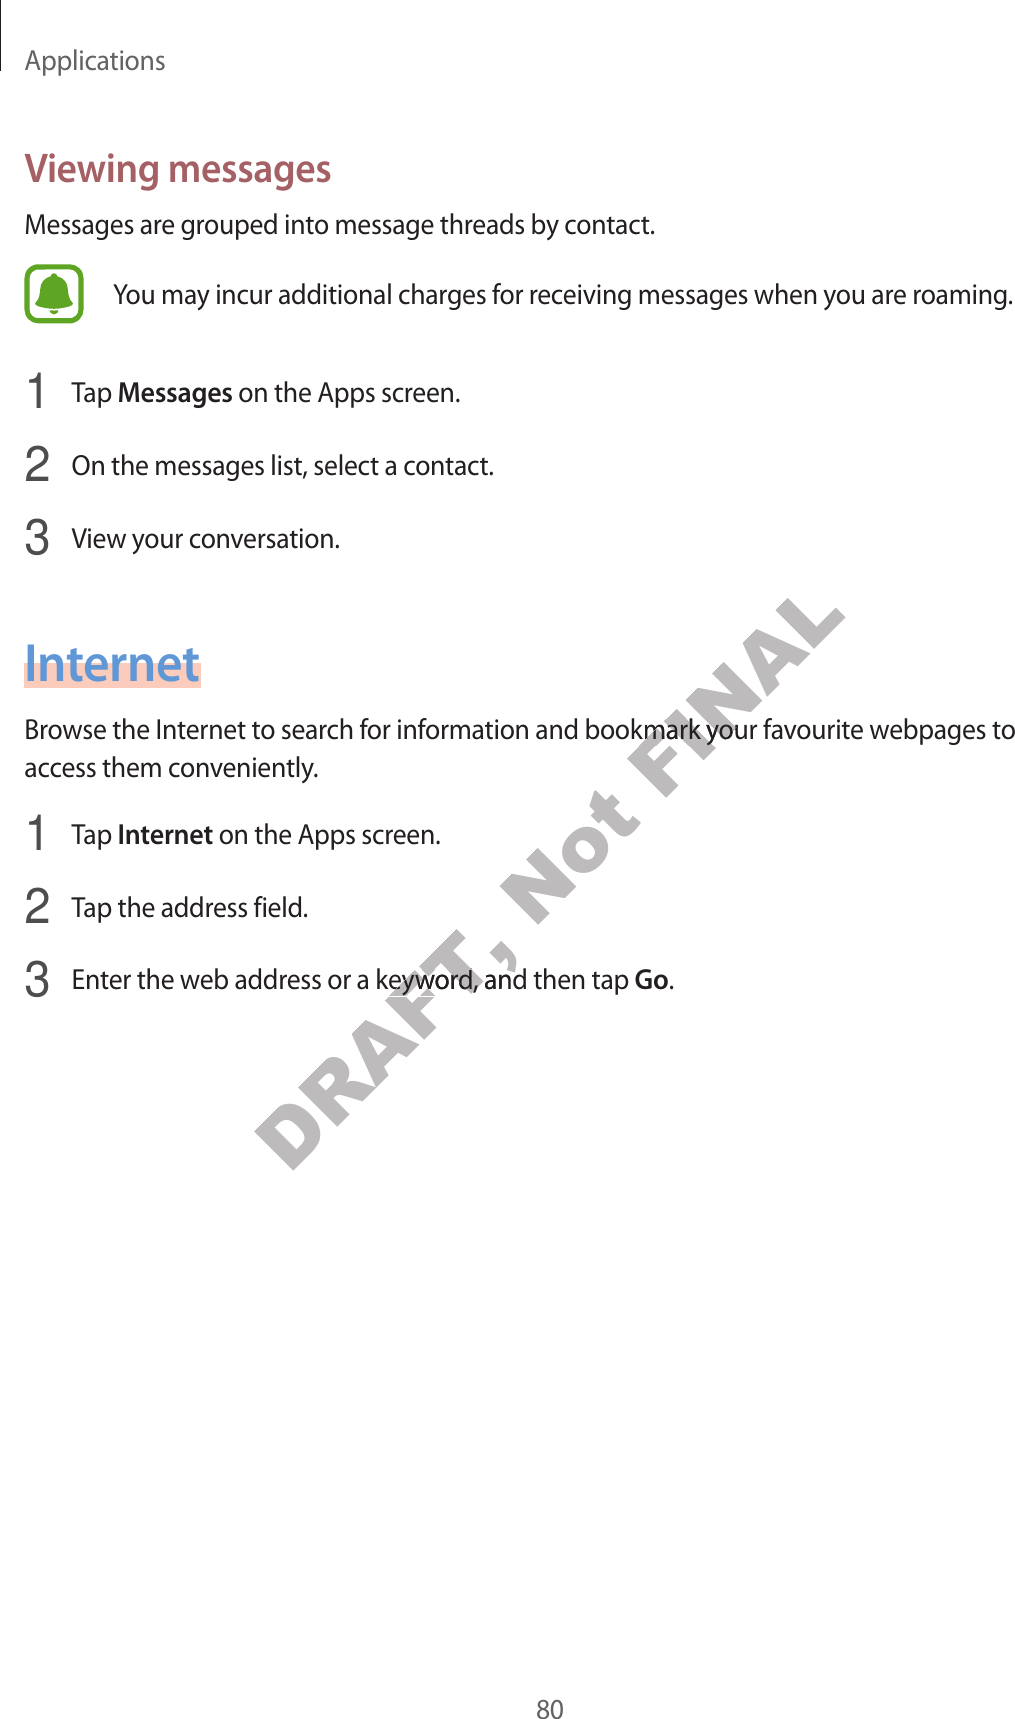 Applications80V ie wing messagesMessages are gr ouped int o message thr eads by c ontact.You may incur additional charges for r ec eiving messages when y ou ar e r oaming .1 Tap Messages on the Apps screen.2 On the messages list, select a contact.3 View y our c on v ersa tion.InternetBrow se the Internet to sear ch for information and bookmark your fa v ourite w ebpages t o access them c on v eniently.1 Tap Internet on the Apps screen.2 Tap the address field.3 Enter the w eb addr ess or a keywor d , and then tap Go.DRAFT, Enter the w eb addr ess or a keywor d , and then tap DRAFT, Enter the w eb addr ess or a keywor d , and then tap Not FINALBrow se the Internet to sear ch for information and bookmark your fa v ourite w ebpages t o FINALBrow se the Internet to sear ch for information and bookmark your fa v ourite w ebpages t o 